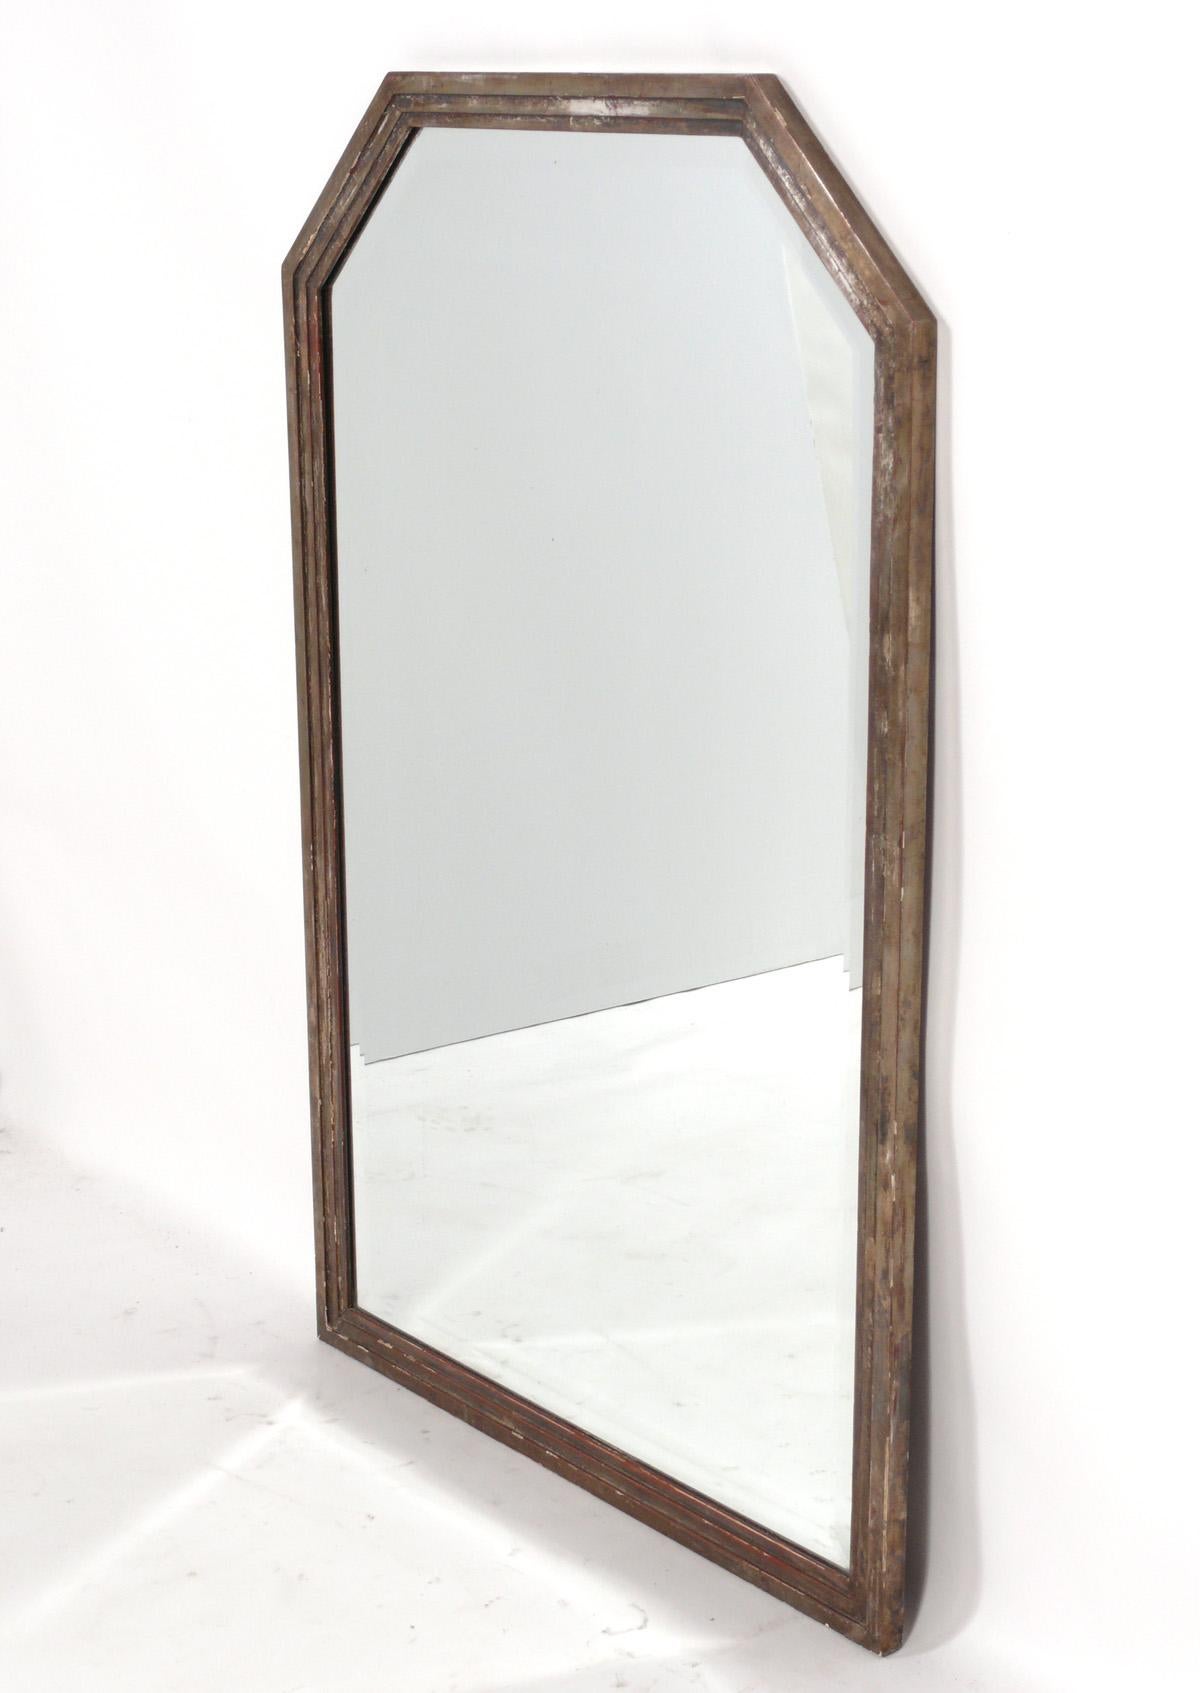 Art Deco Mirror in Wonderful Distressed Silver Leaf Finish, American, circa 1930s. Elegant Art Deco stepped design and wonderful distressed silver leaf finish, beautifully revealing the deep Chinese red color bole or underlayer. It measures an